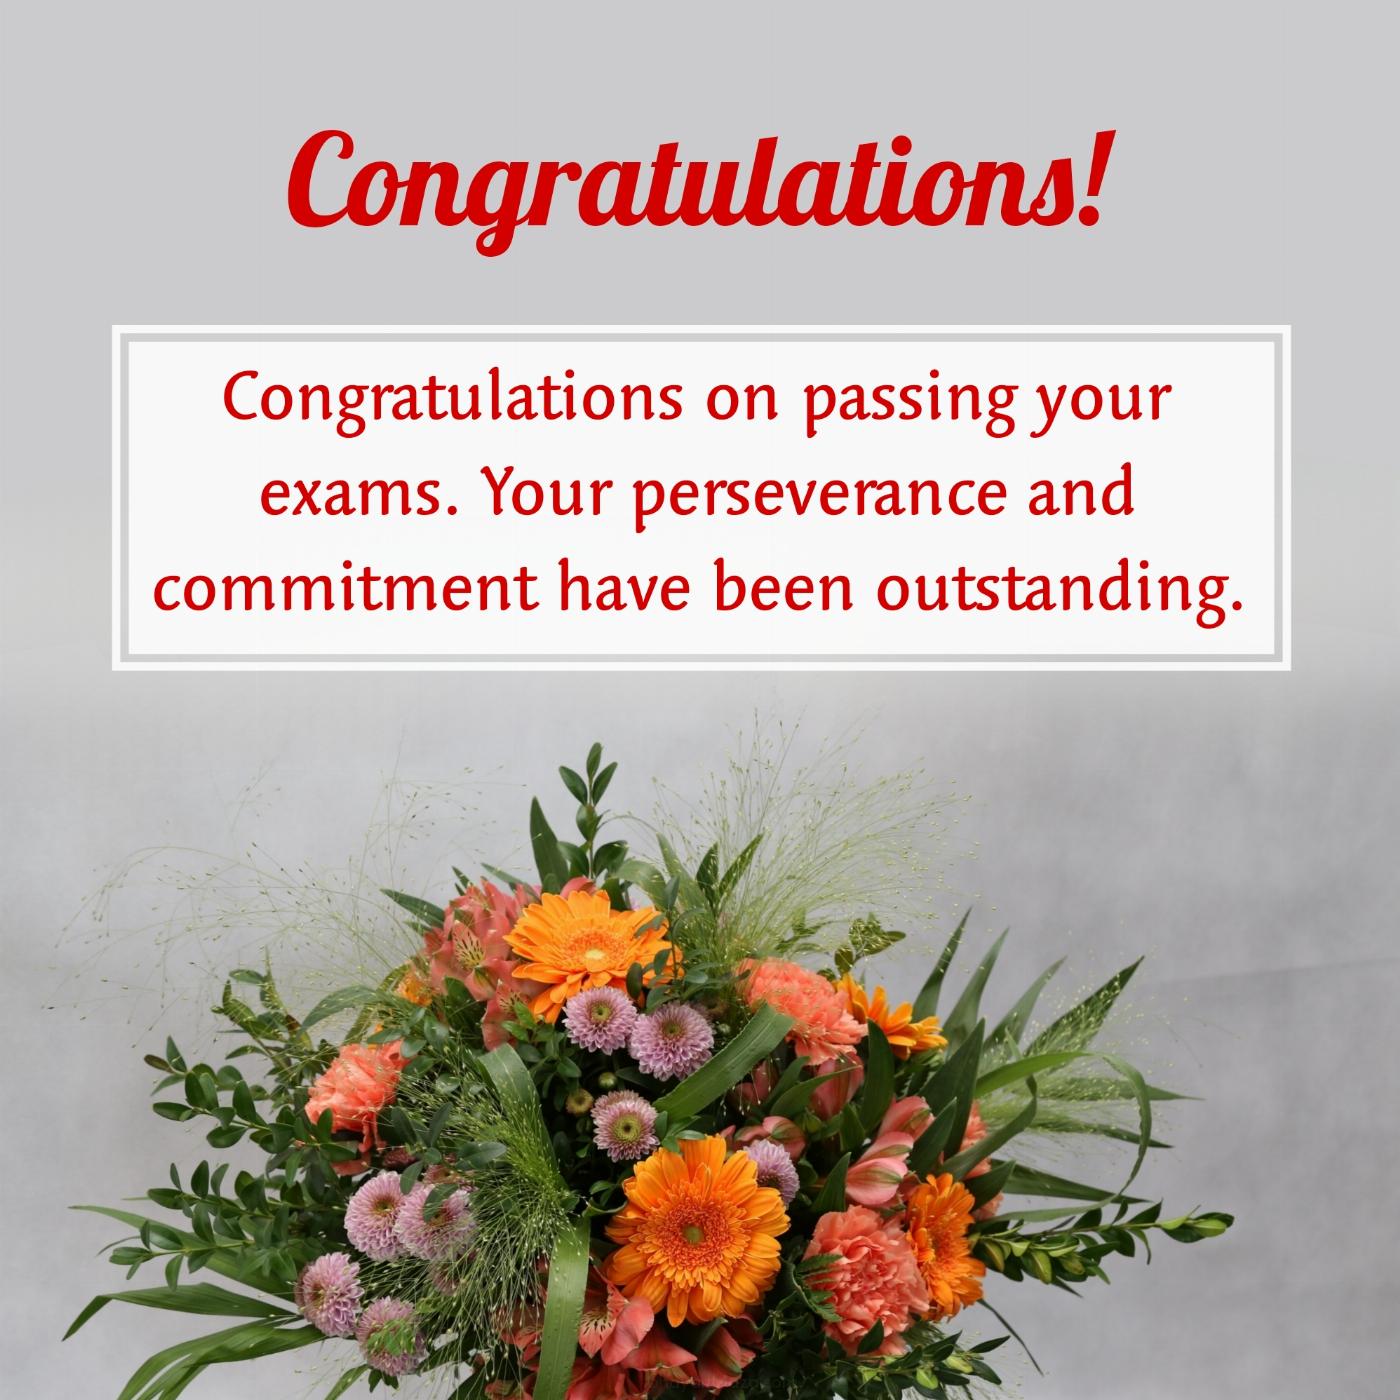 Congratulations on passing your exams